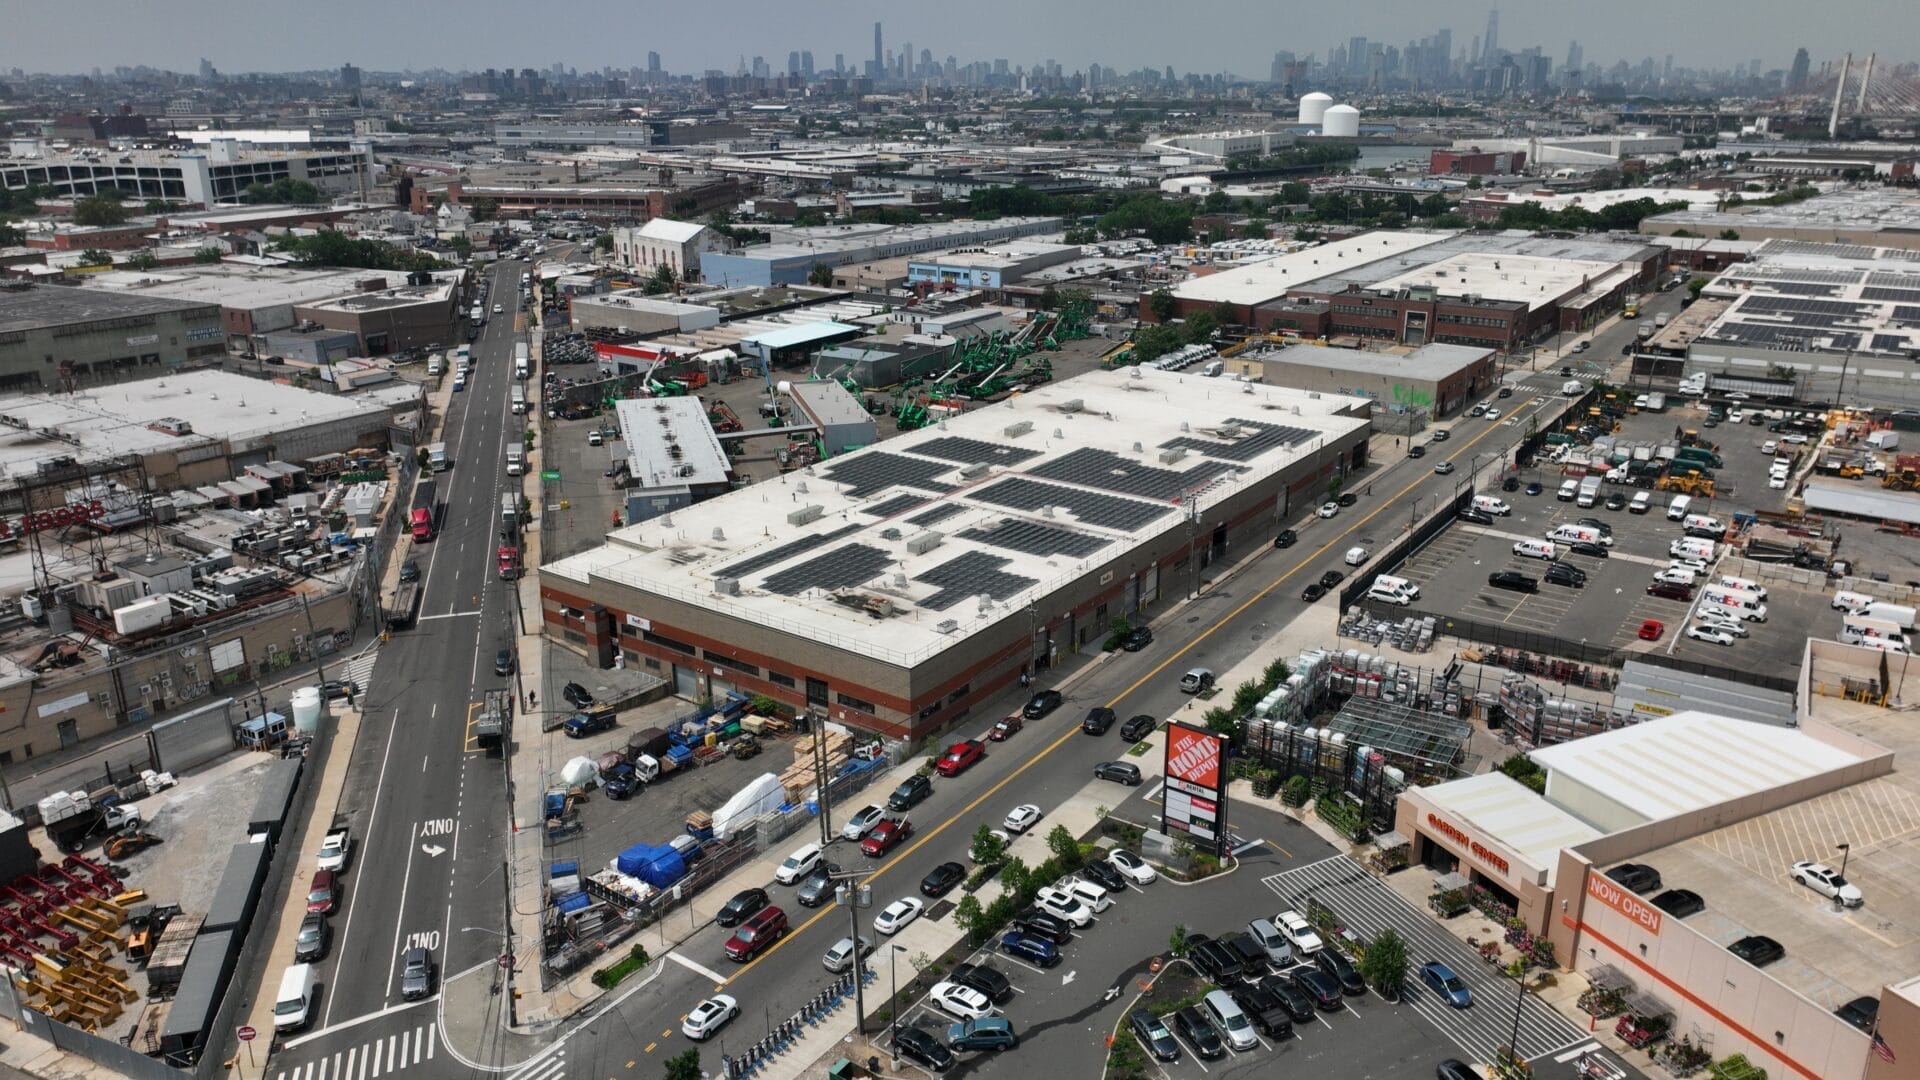 Bridge Industrial Acquires Value-Add Property to be Home of “Bridge Point Maspeth” in Queens, NY